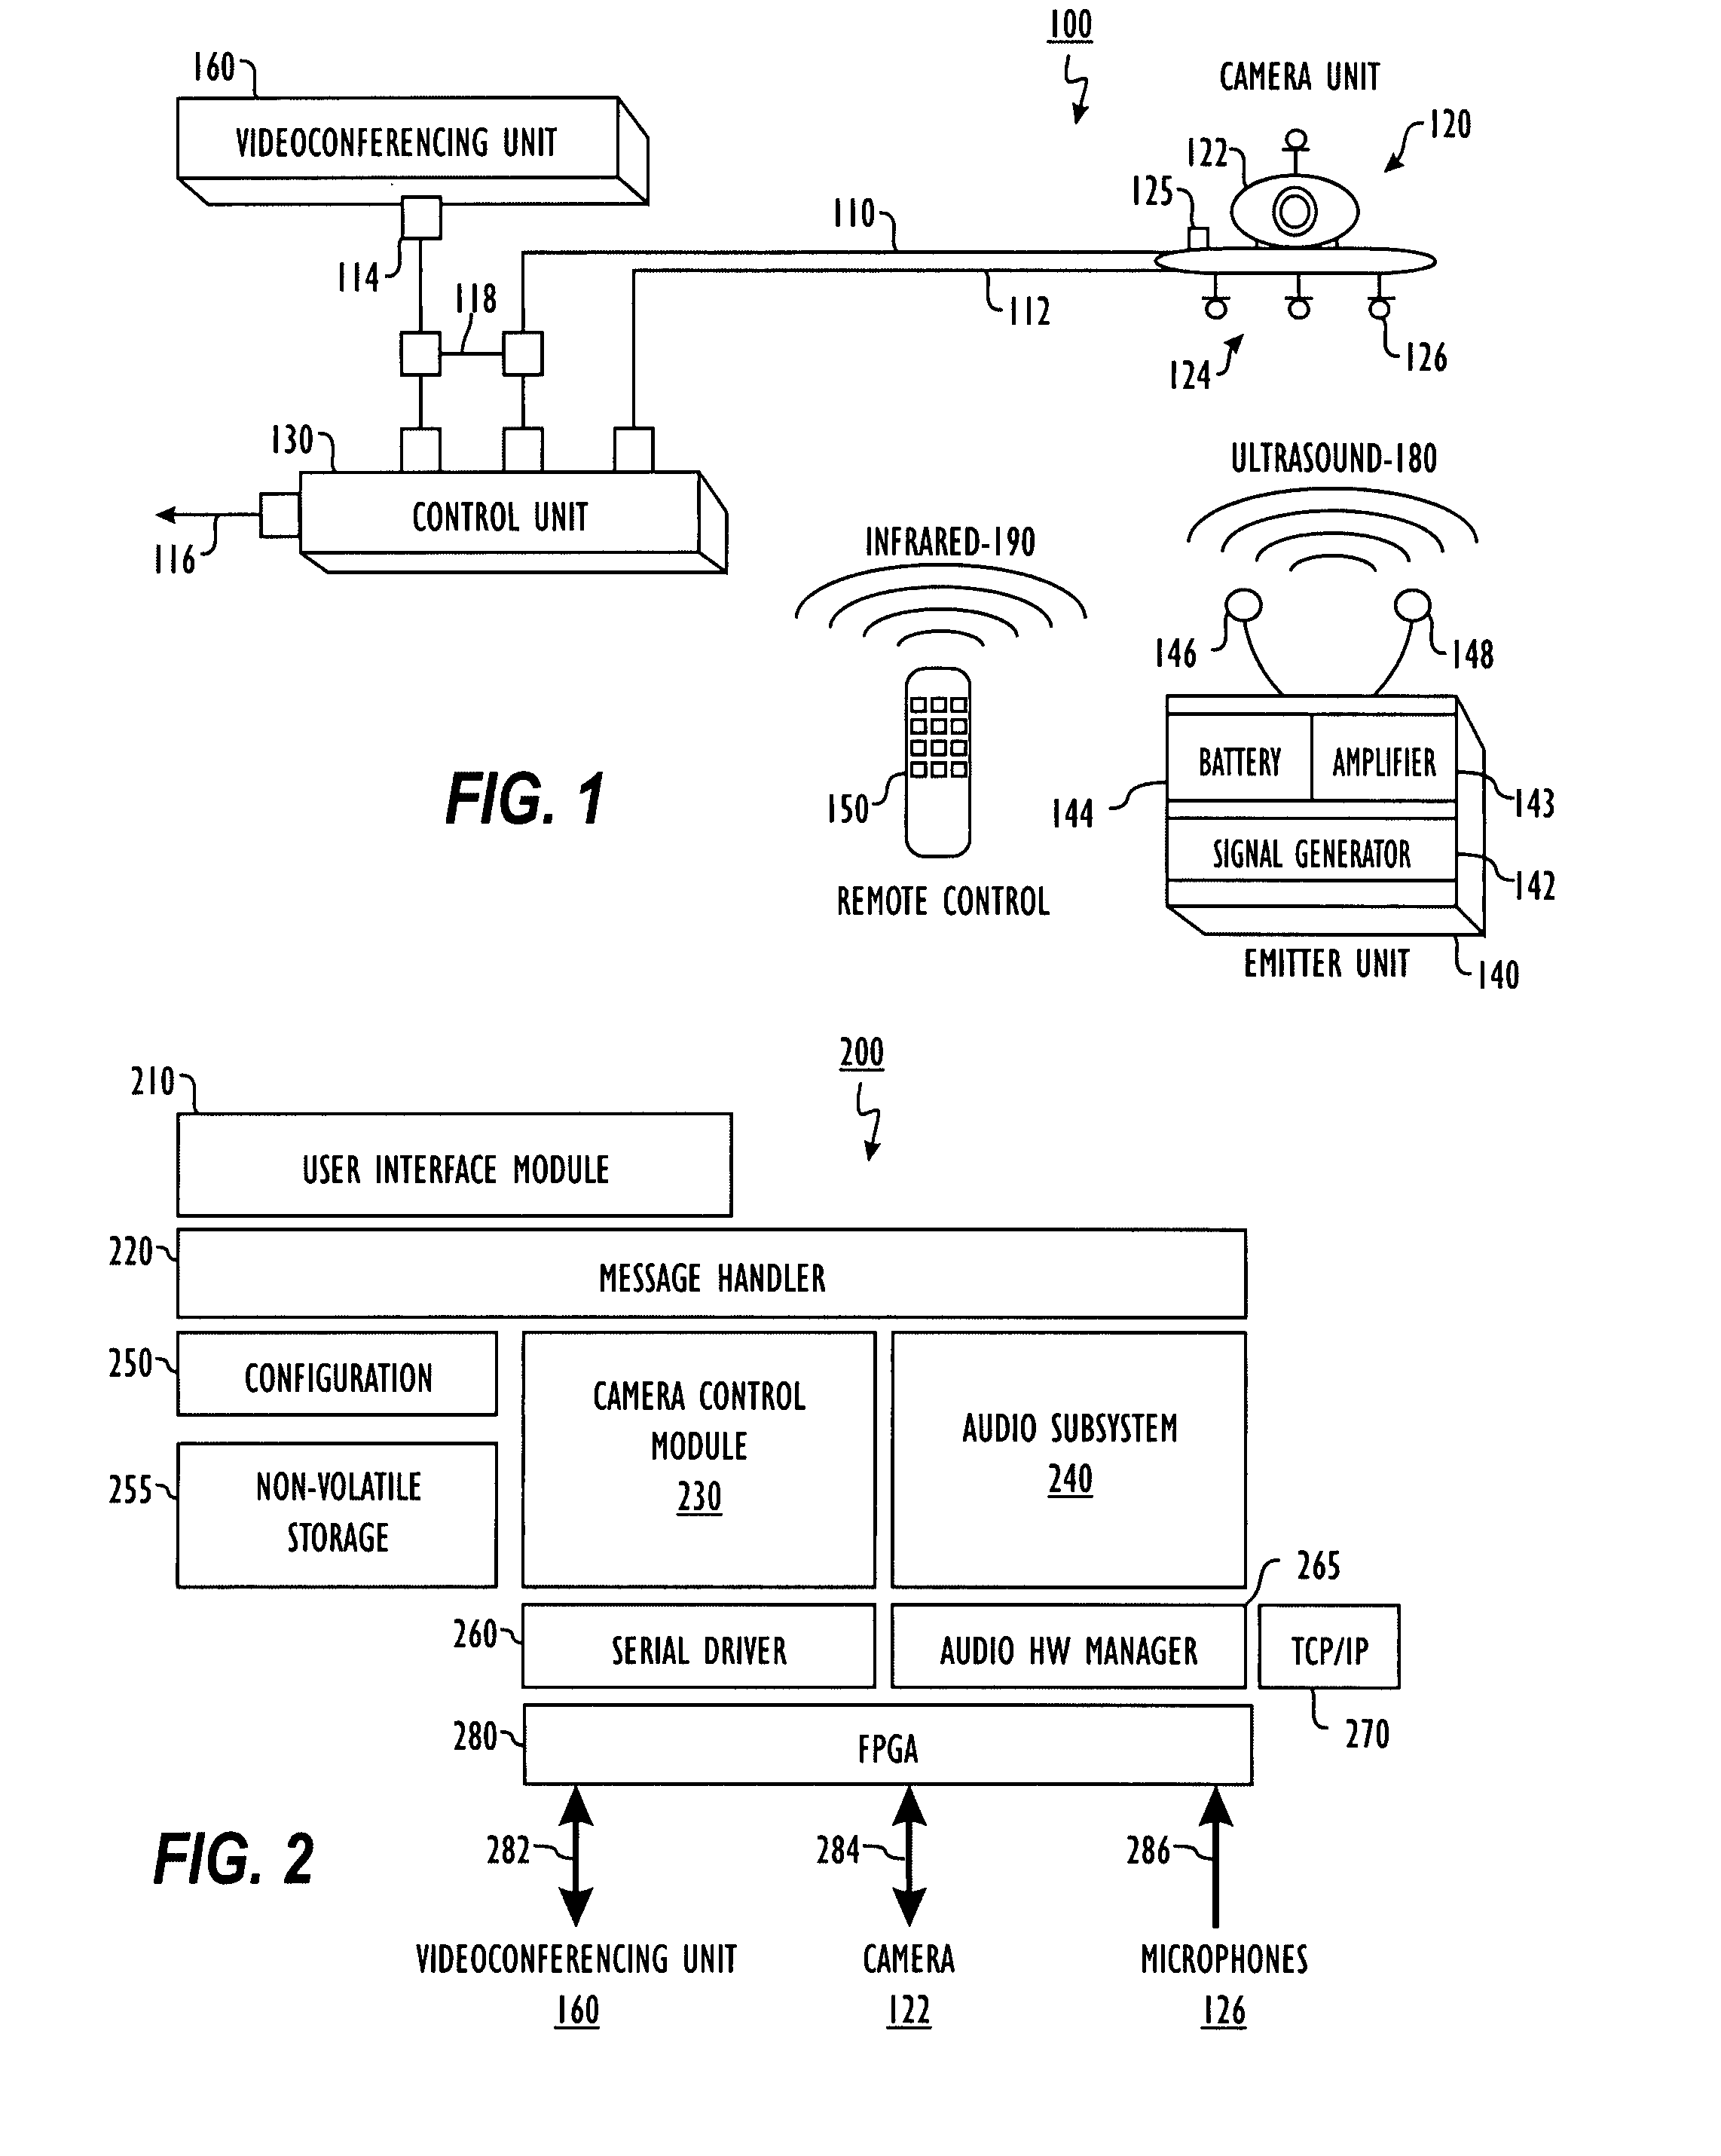 Ultrasonic camera tracking system and associated methods